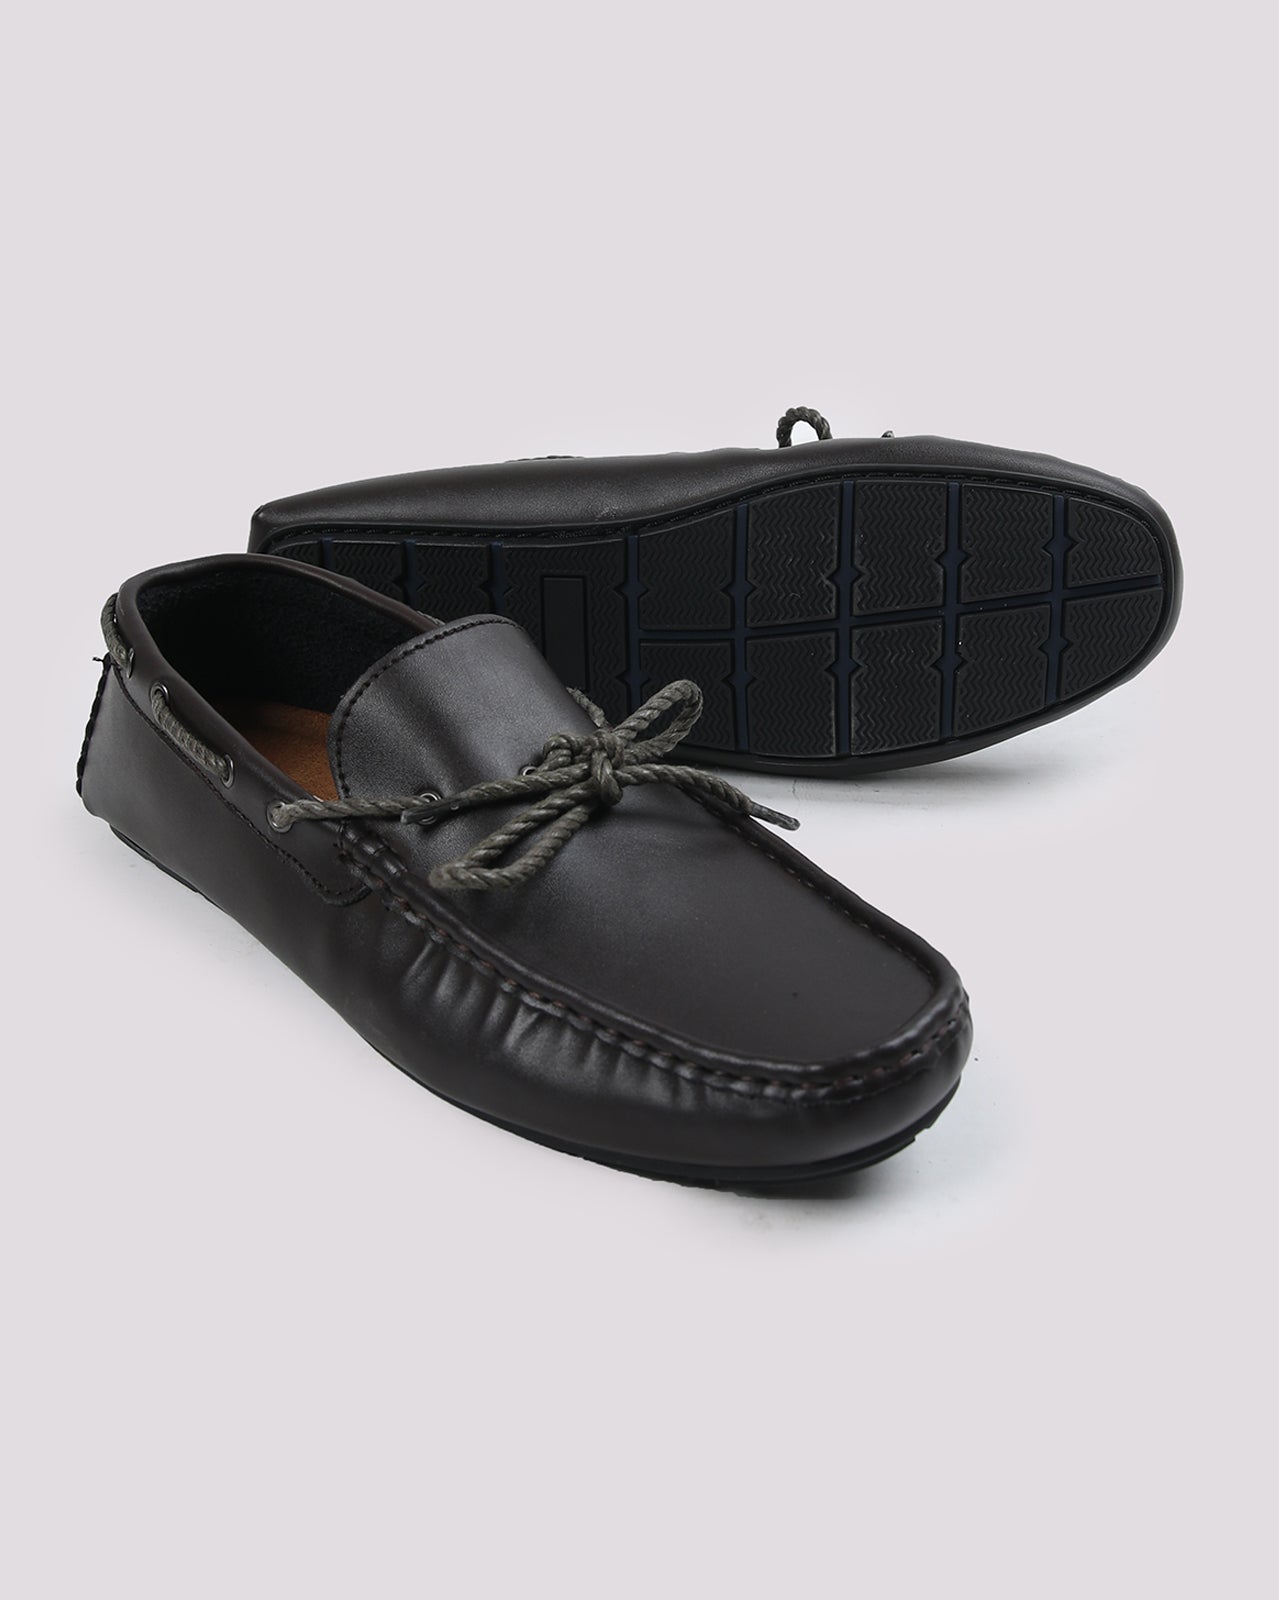 Brown Classic Loafer Shoes